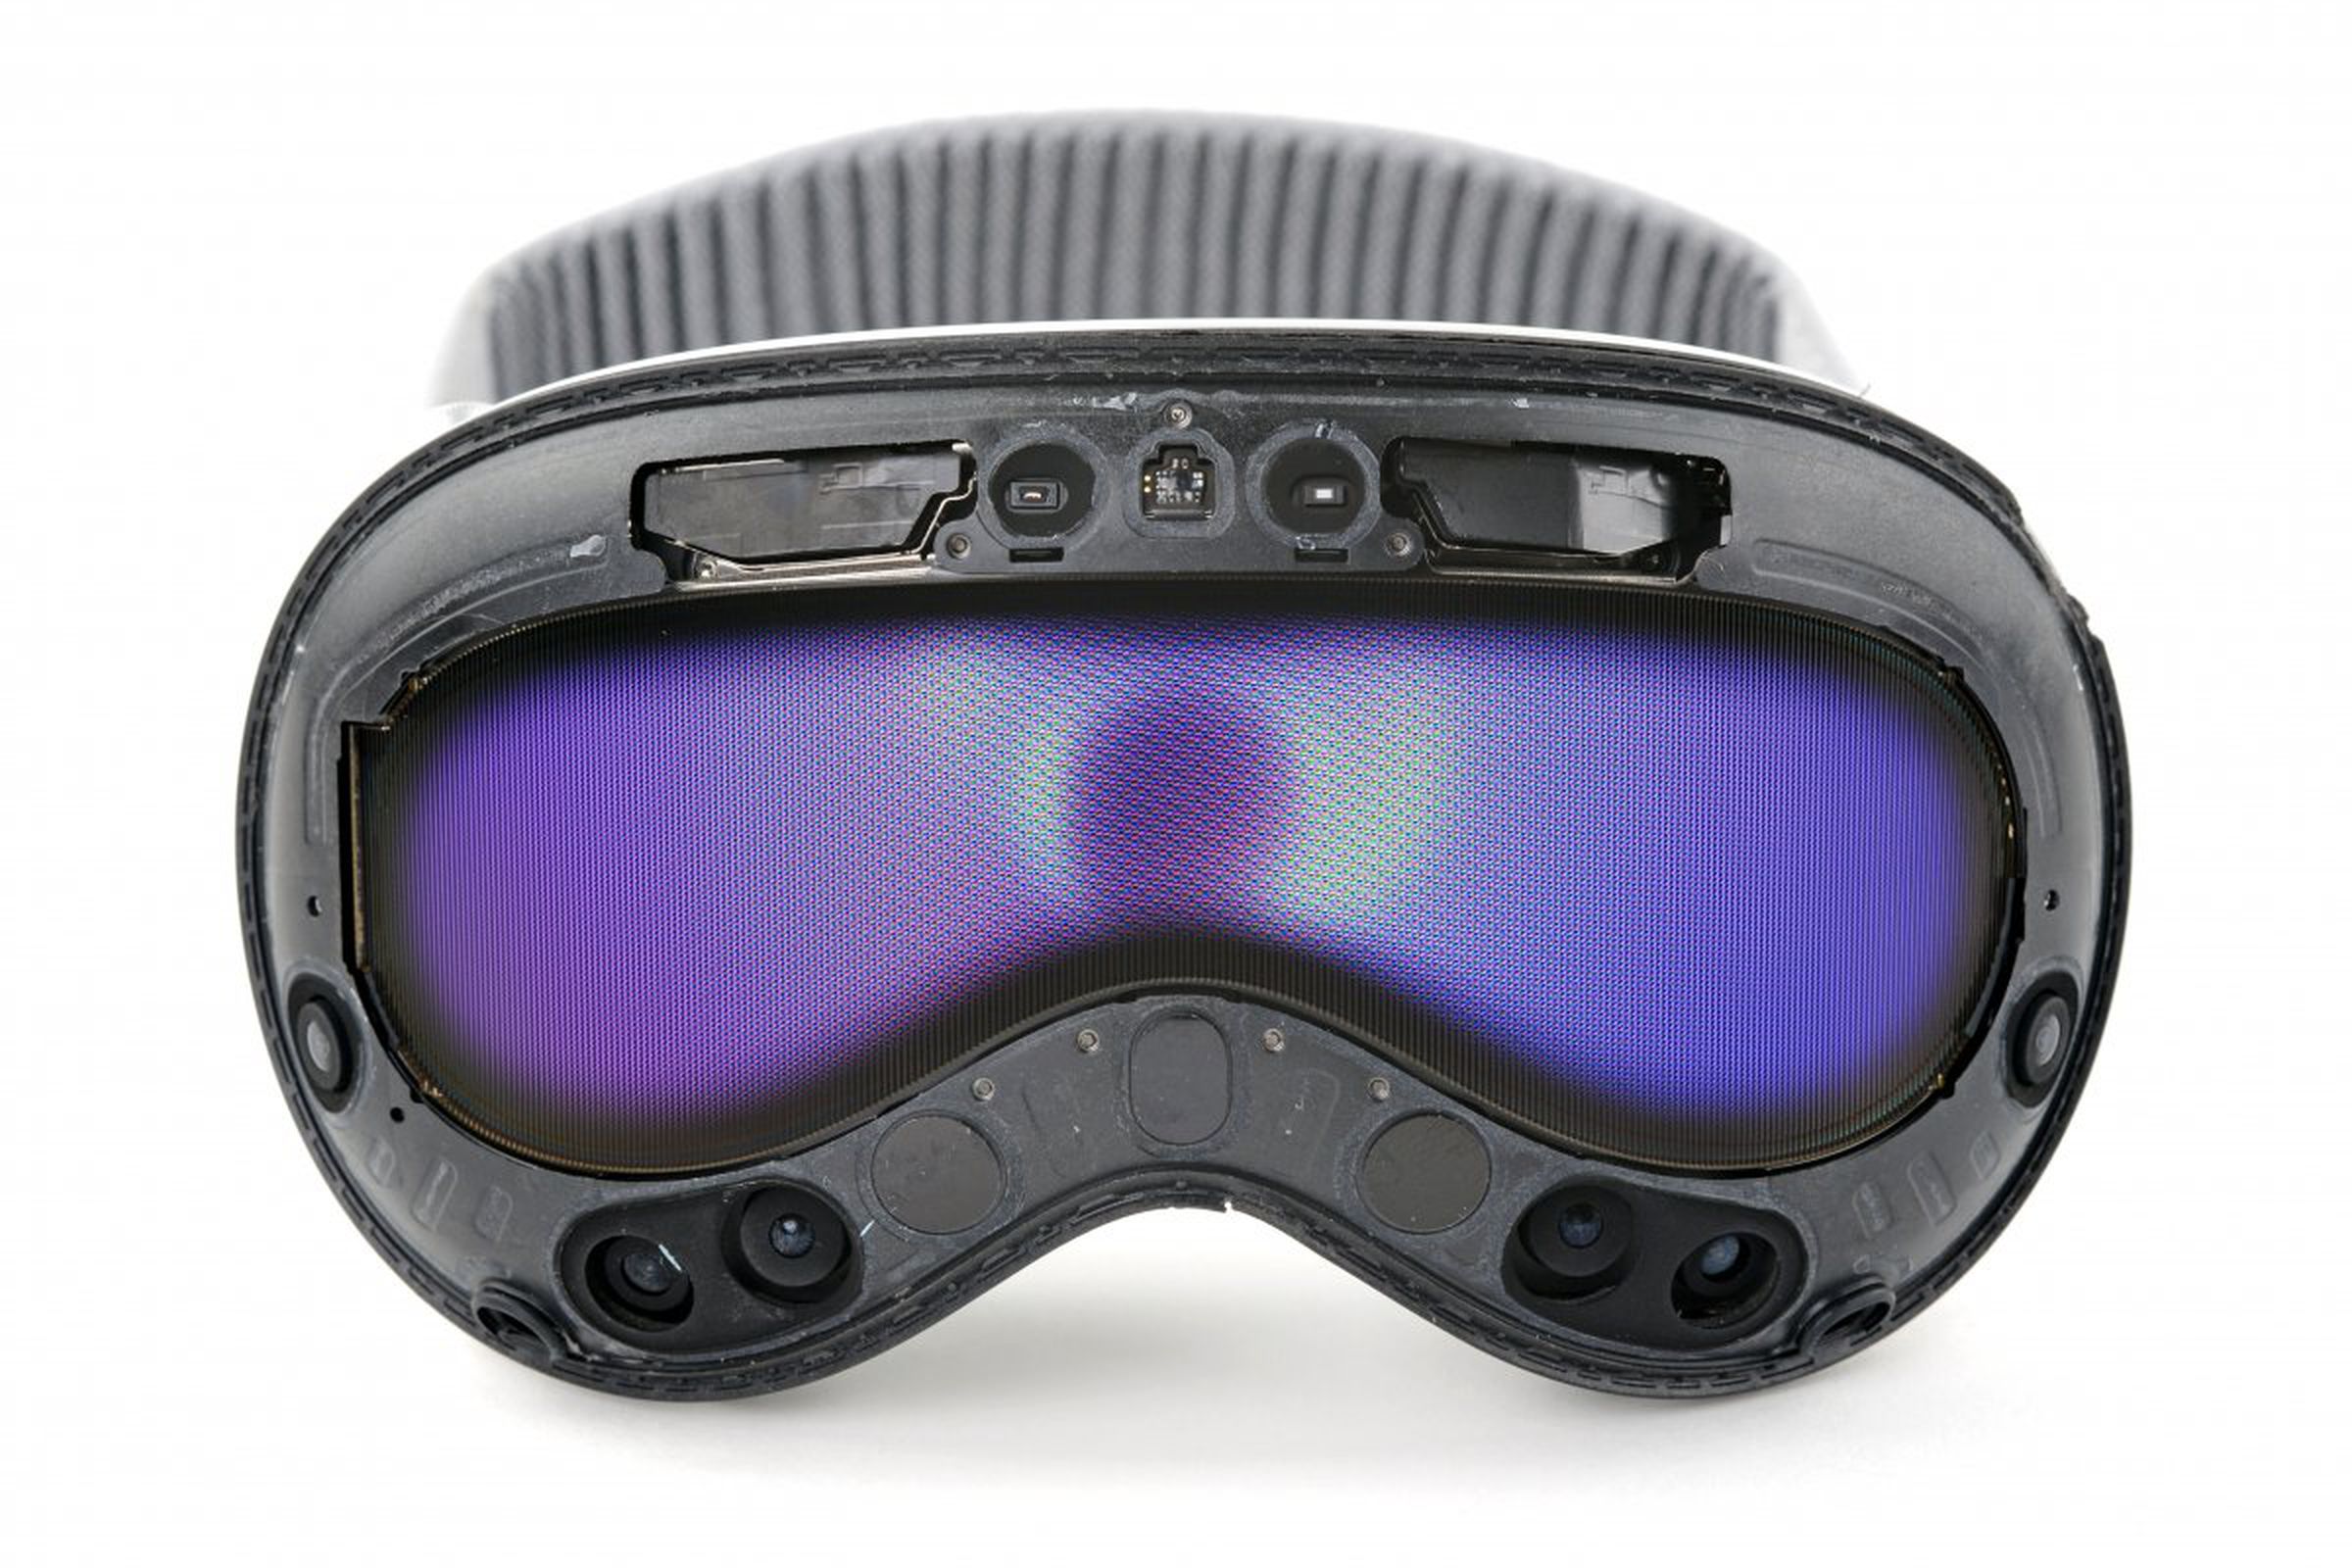 A picture of the Vision Pro without its front glass layers.